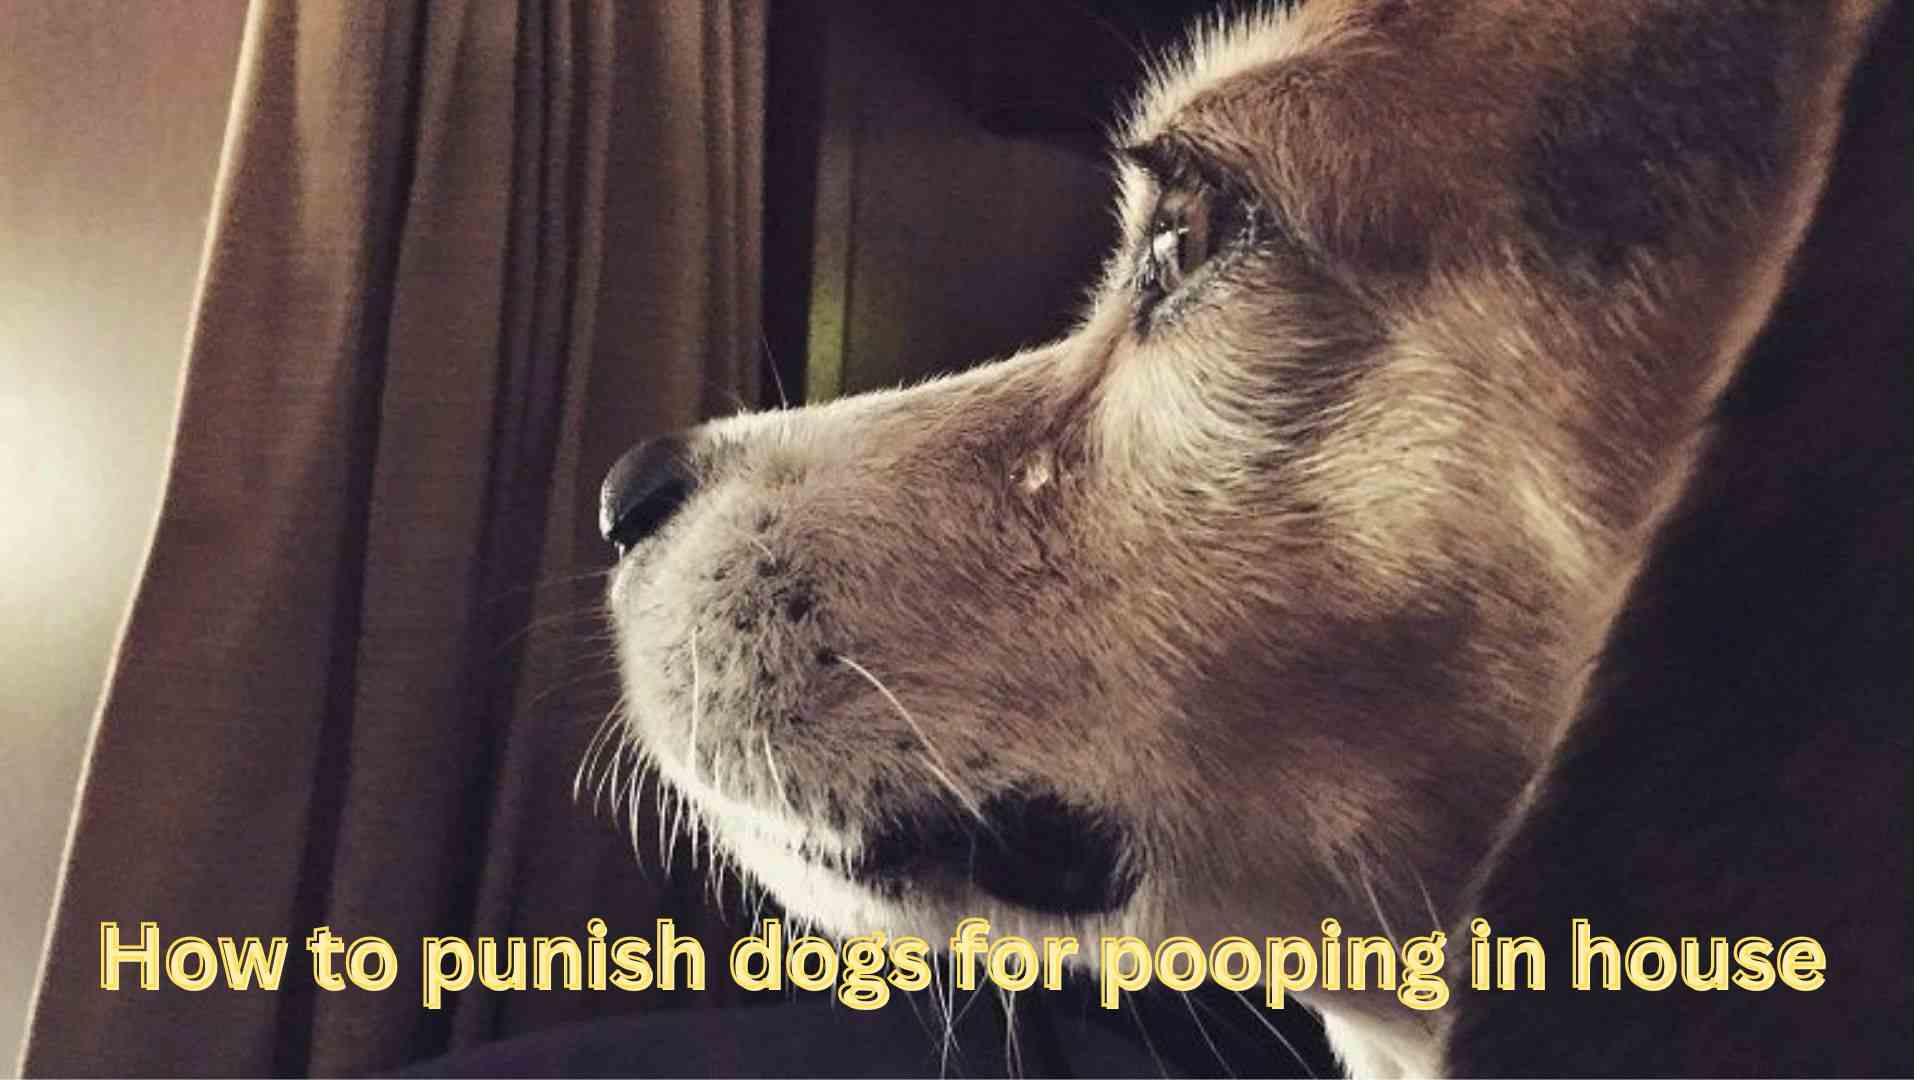 How to punish dogs for pooping in house